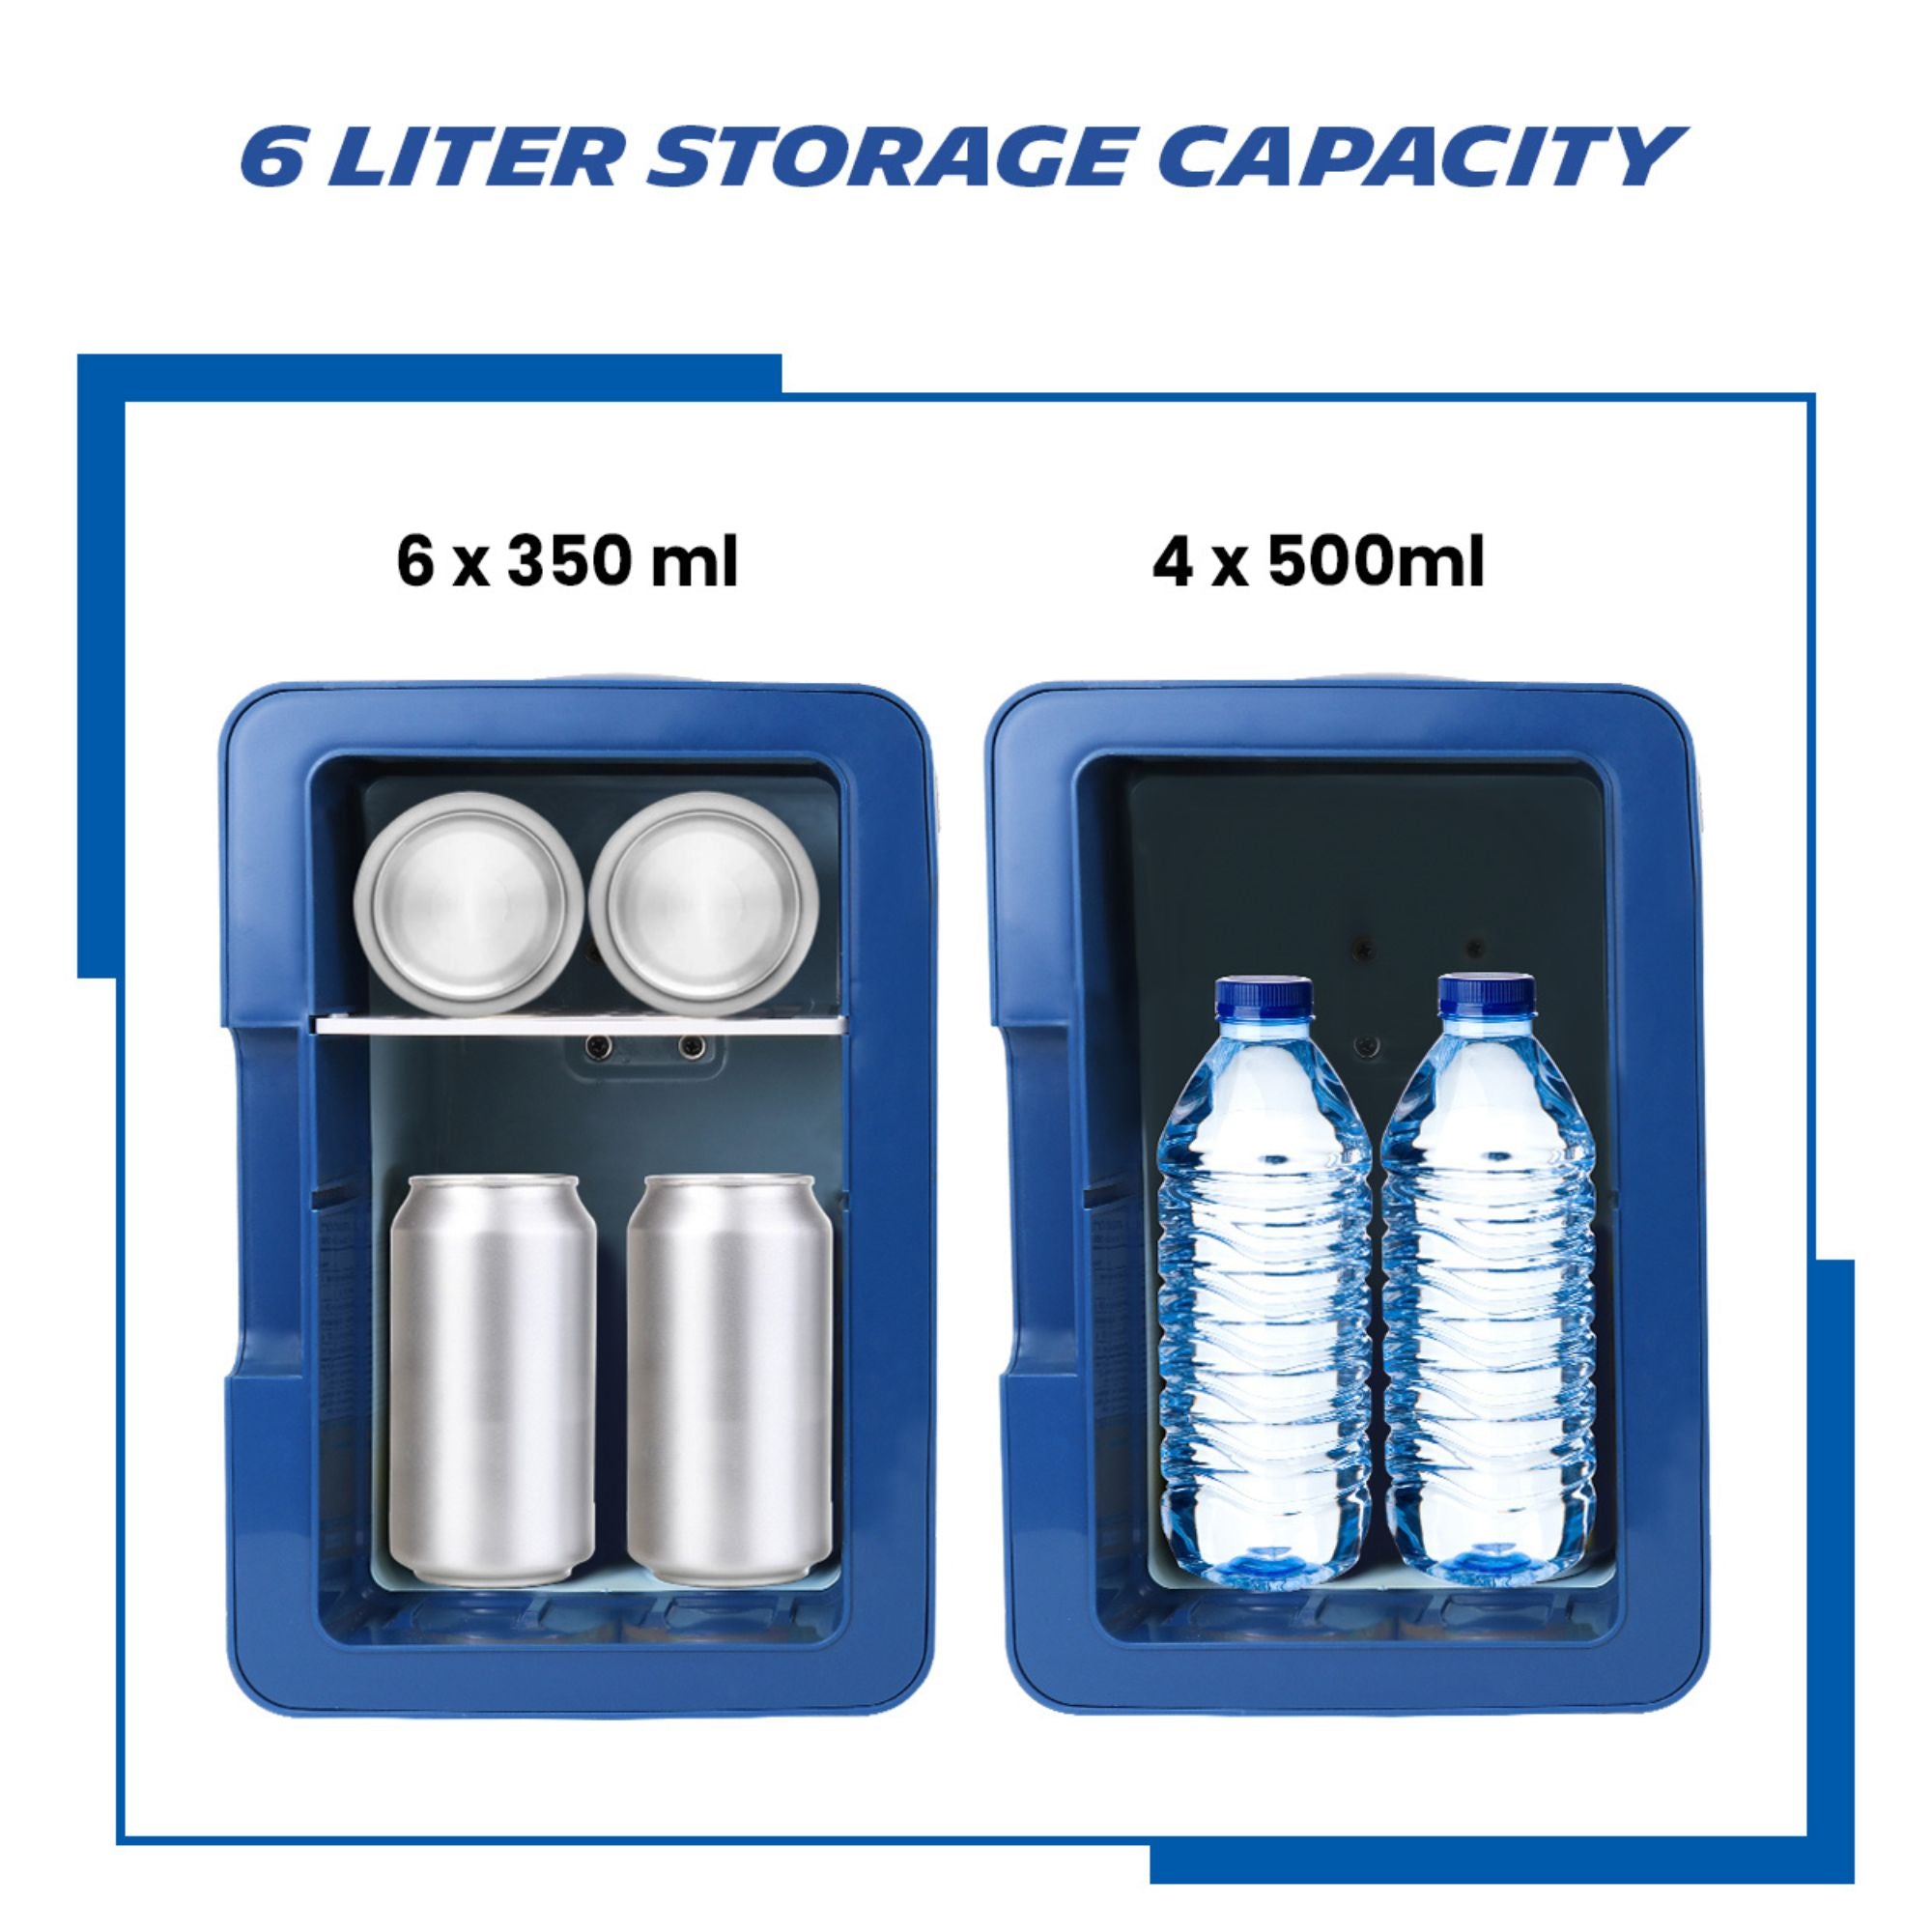 Two side-by-side pictures of the interior of the 6 can Michelin mini fridge: Left image shows the 6 x 350 mL soda cans and right image shows 4 x 500 mL water bottles. Text above reads "6 liter storage capacity"